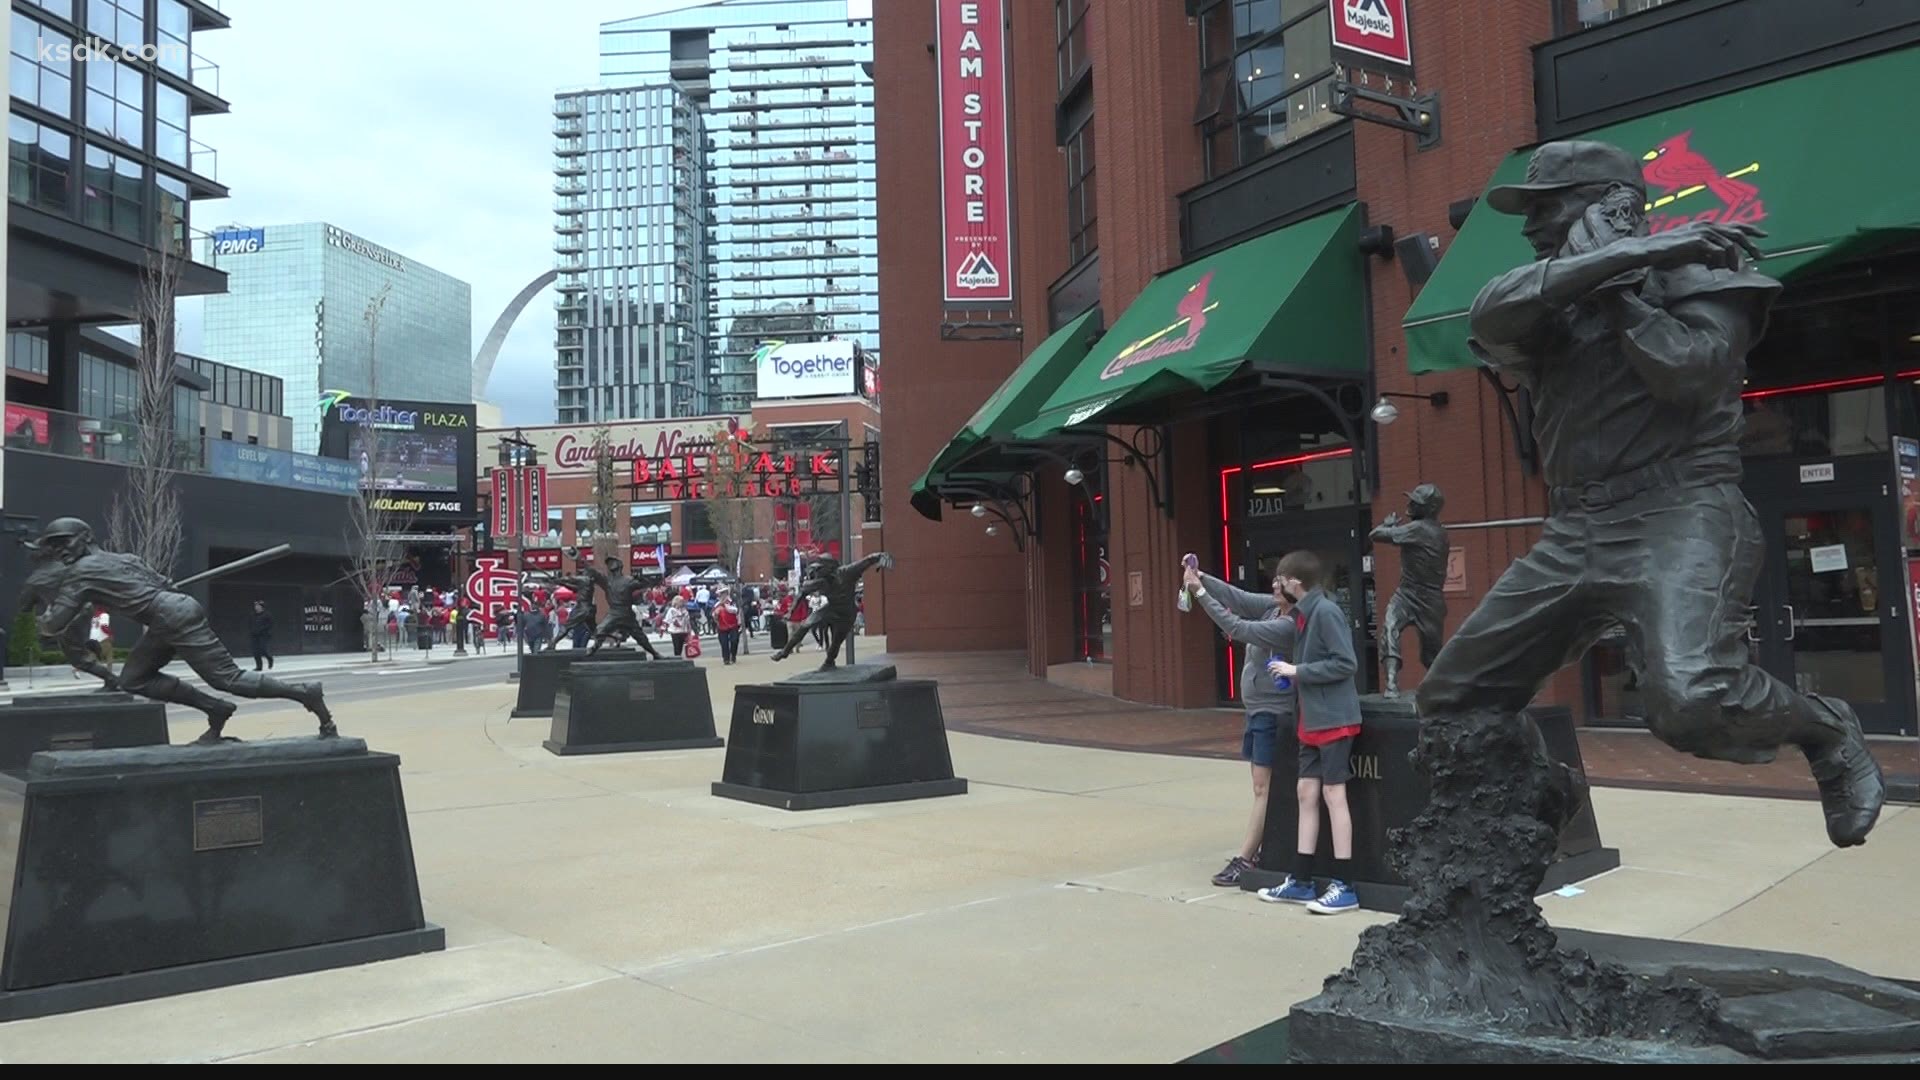 Cardinals fans haven't been in the stands since October 2019. We caught up folks downtown for the home opener about going to Thursday's game.